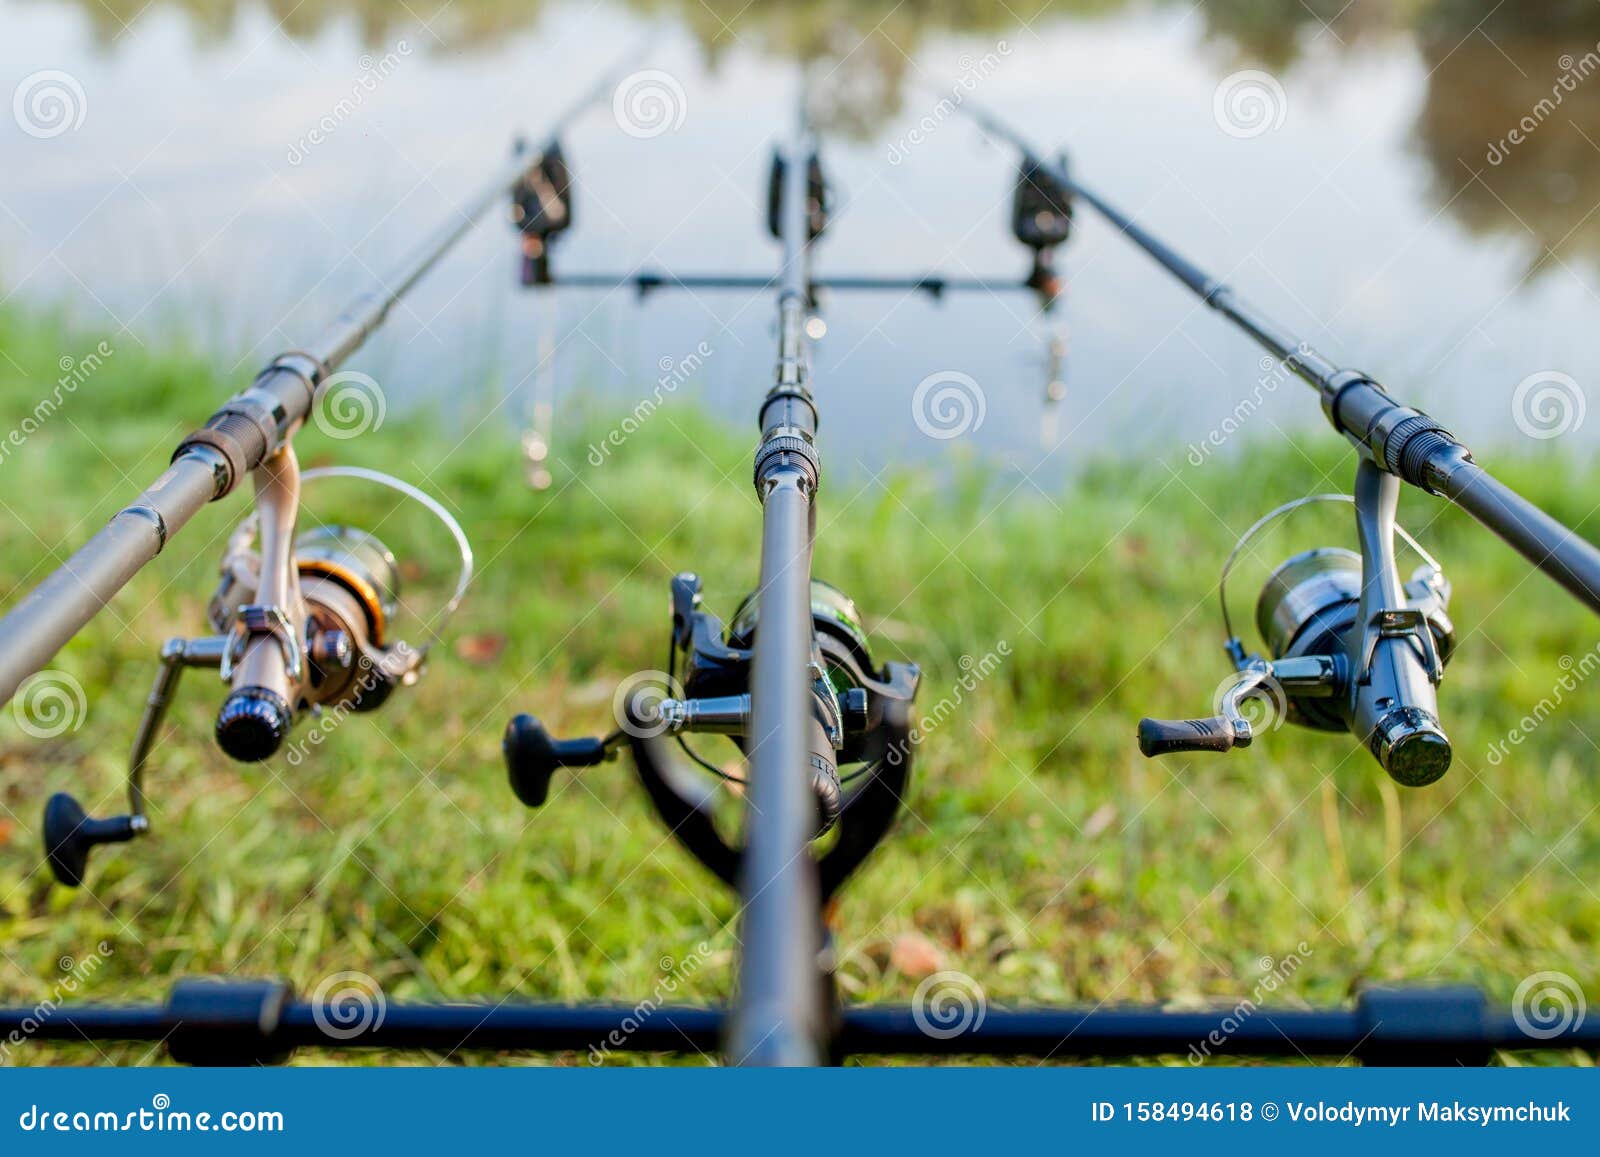 Closeup of a Reel Fishing Rod on a Prop and Water Background Stock Photo -  Image of line, guide: 158494618